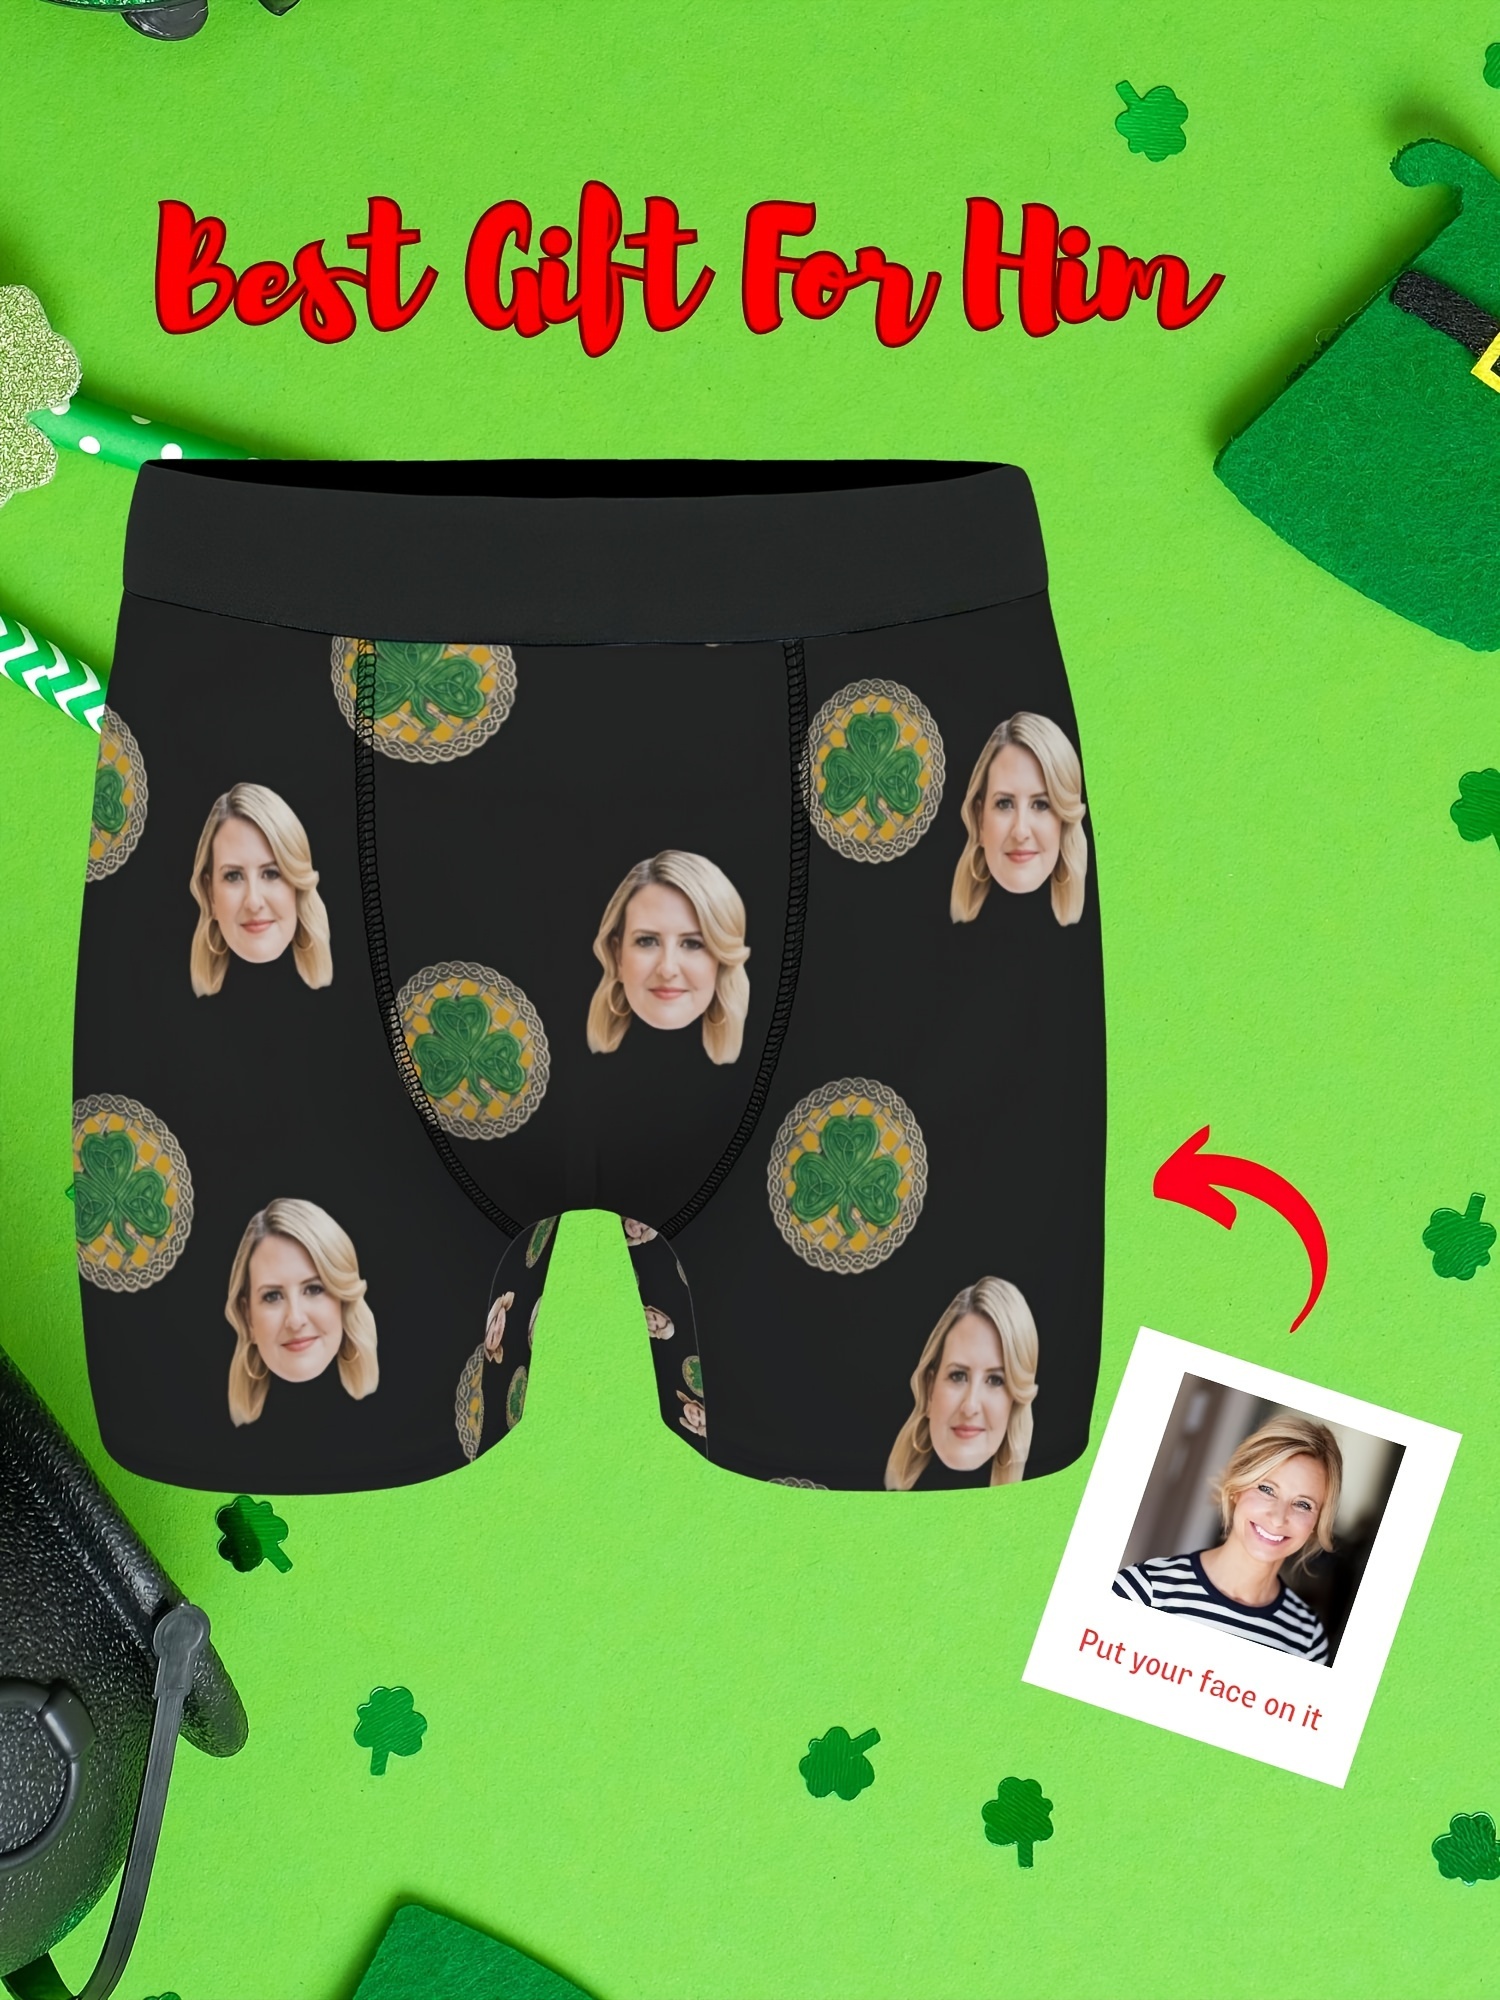 Buy The Perfect Gift for Him CUSTOM Face BOXERS, FUNNY Boxer